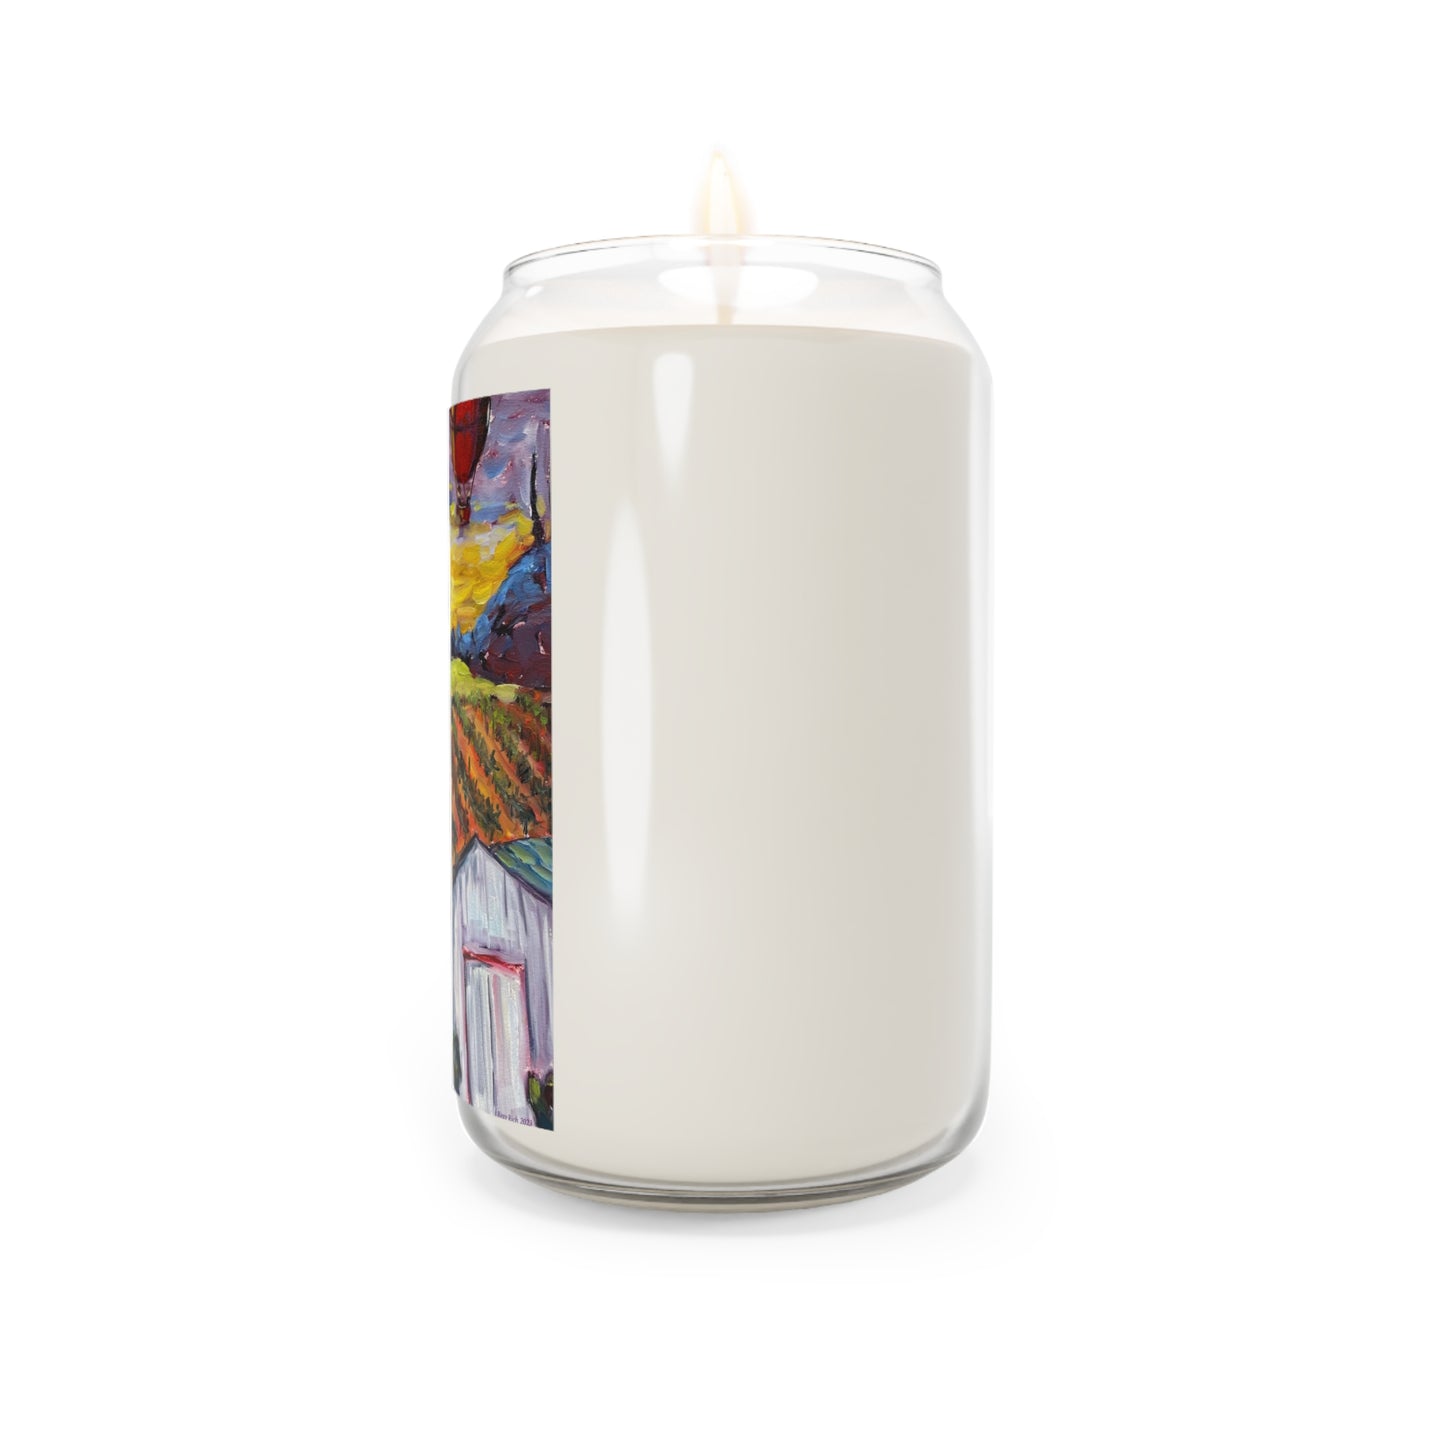 Ultimate Sunrise (Right) Scented Candle, 13.75oz